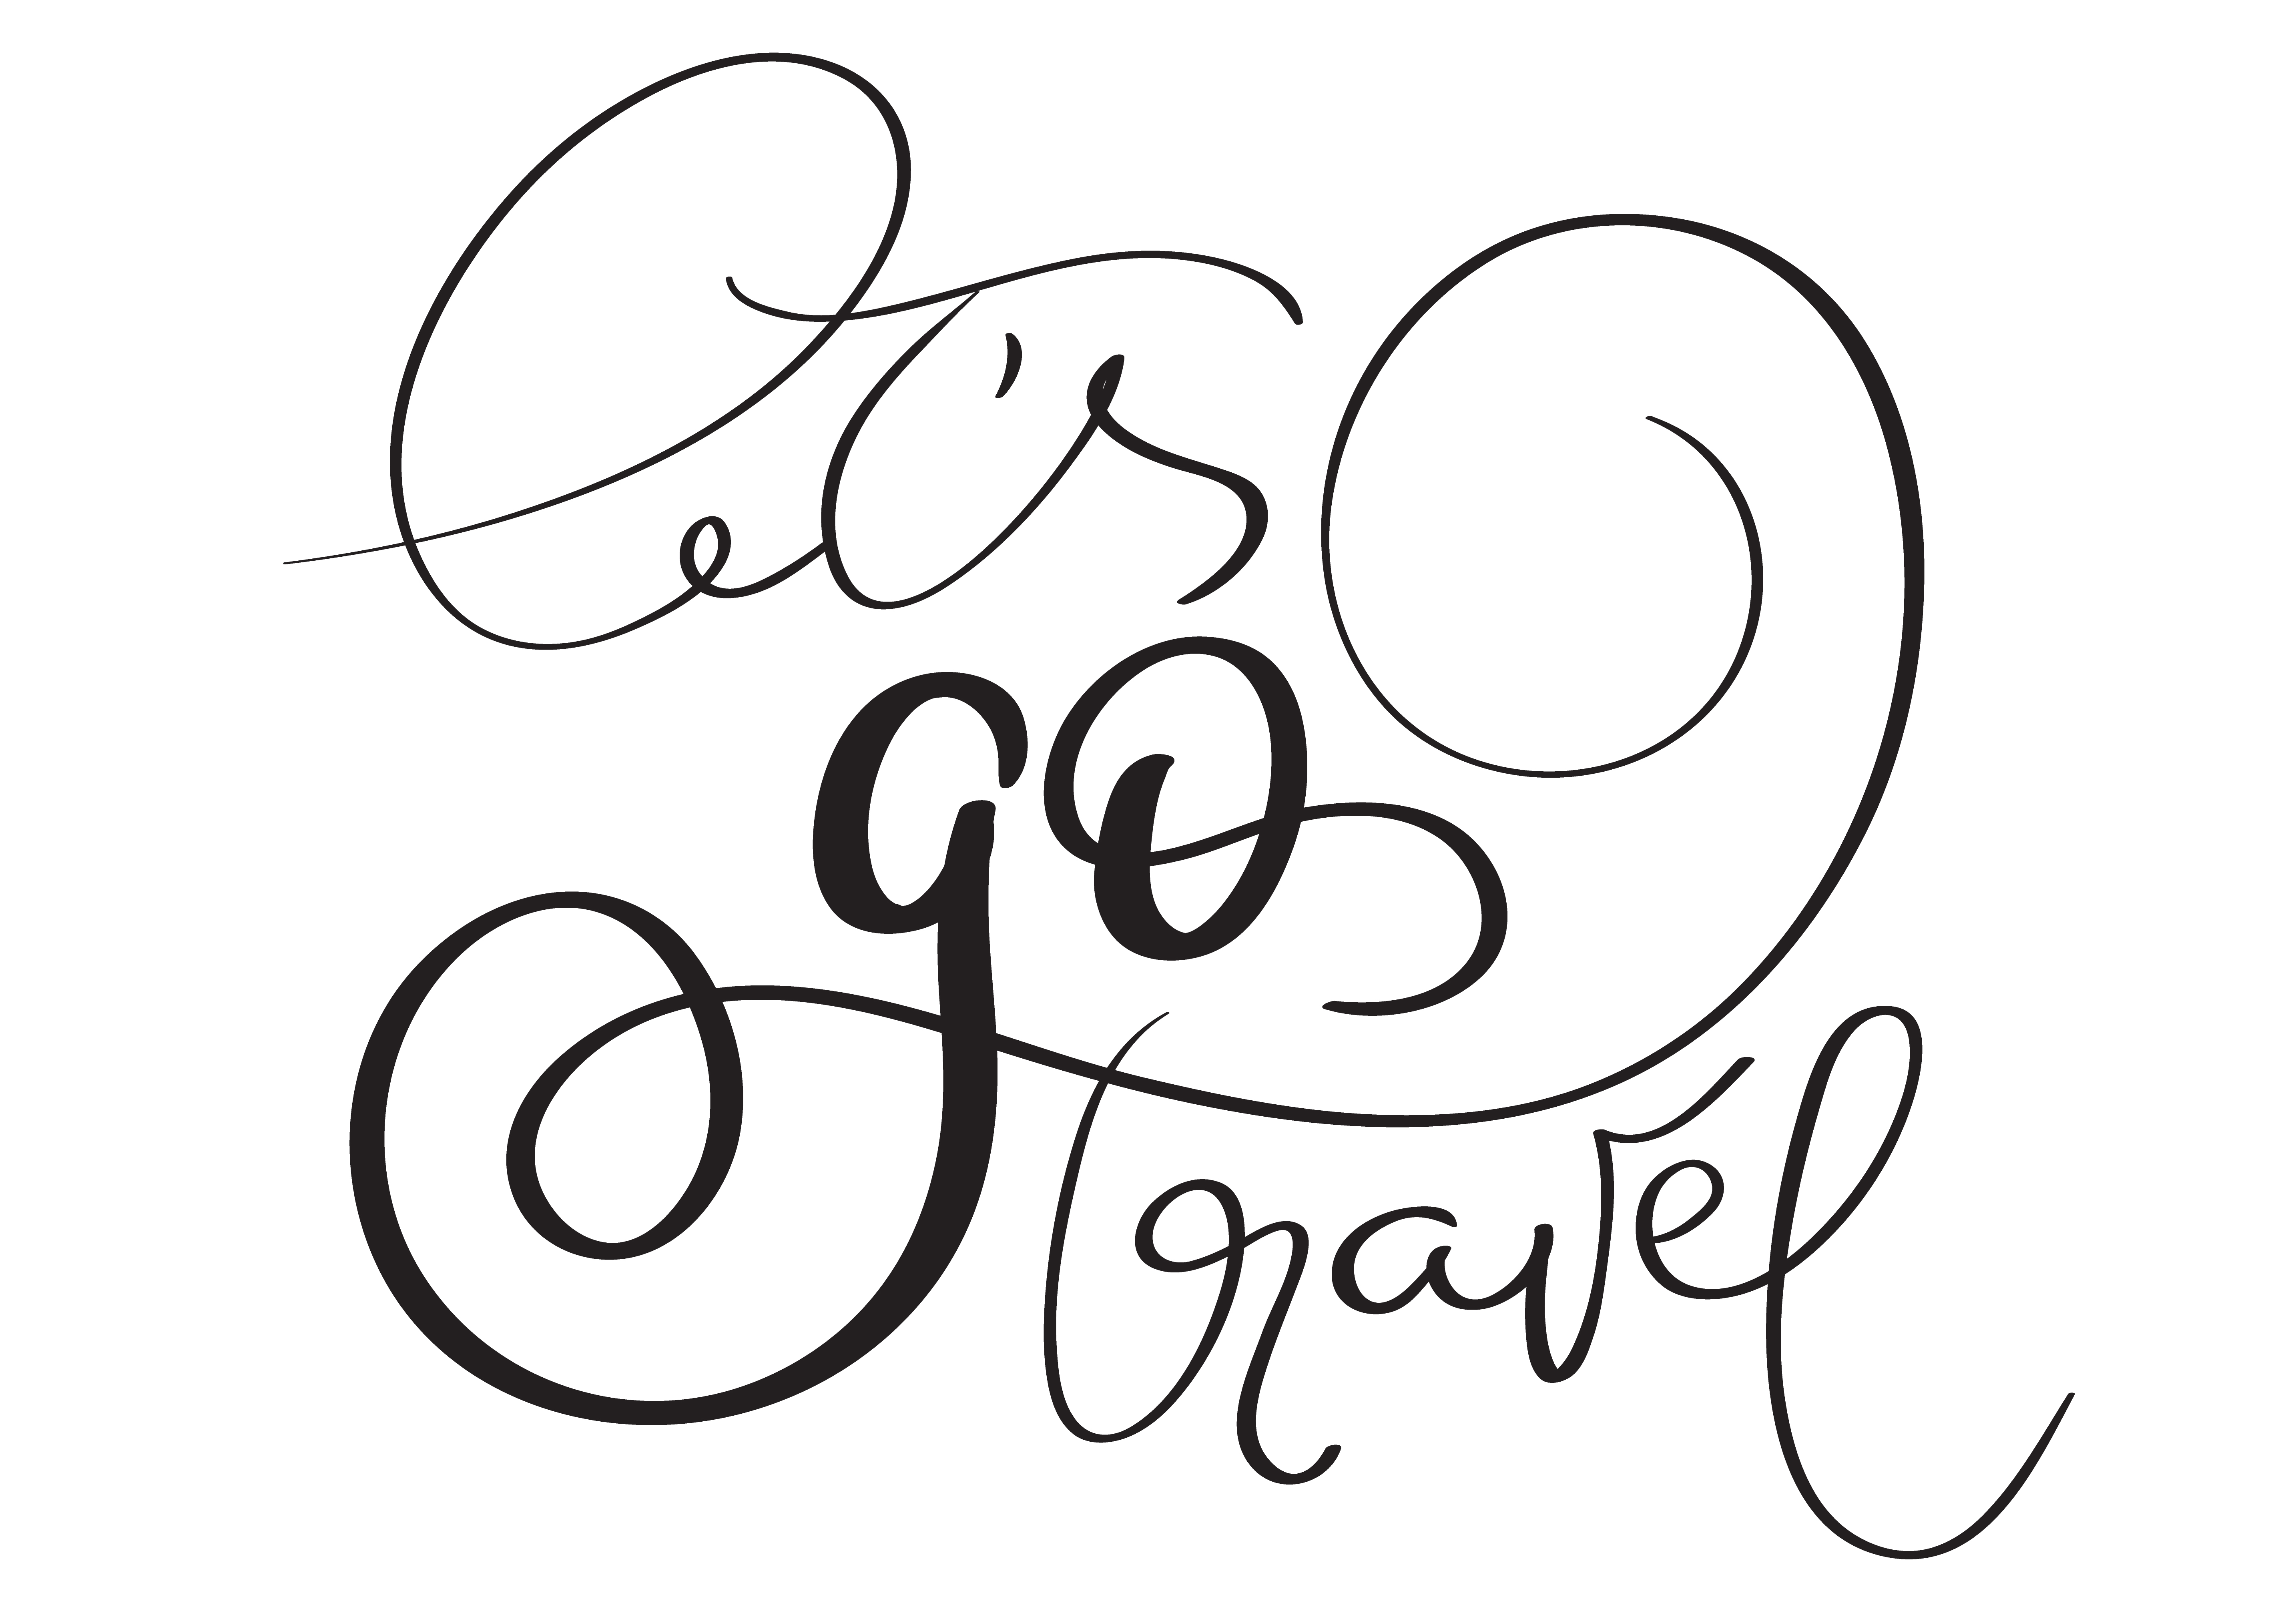 Lets go travel hand made vector vintage text on white